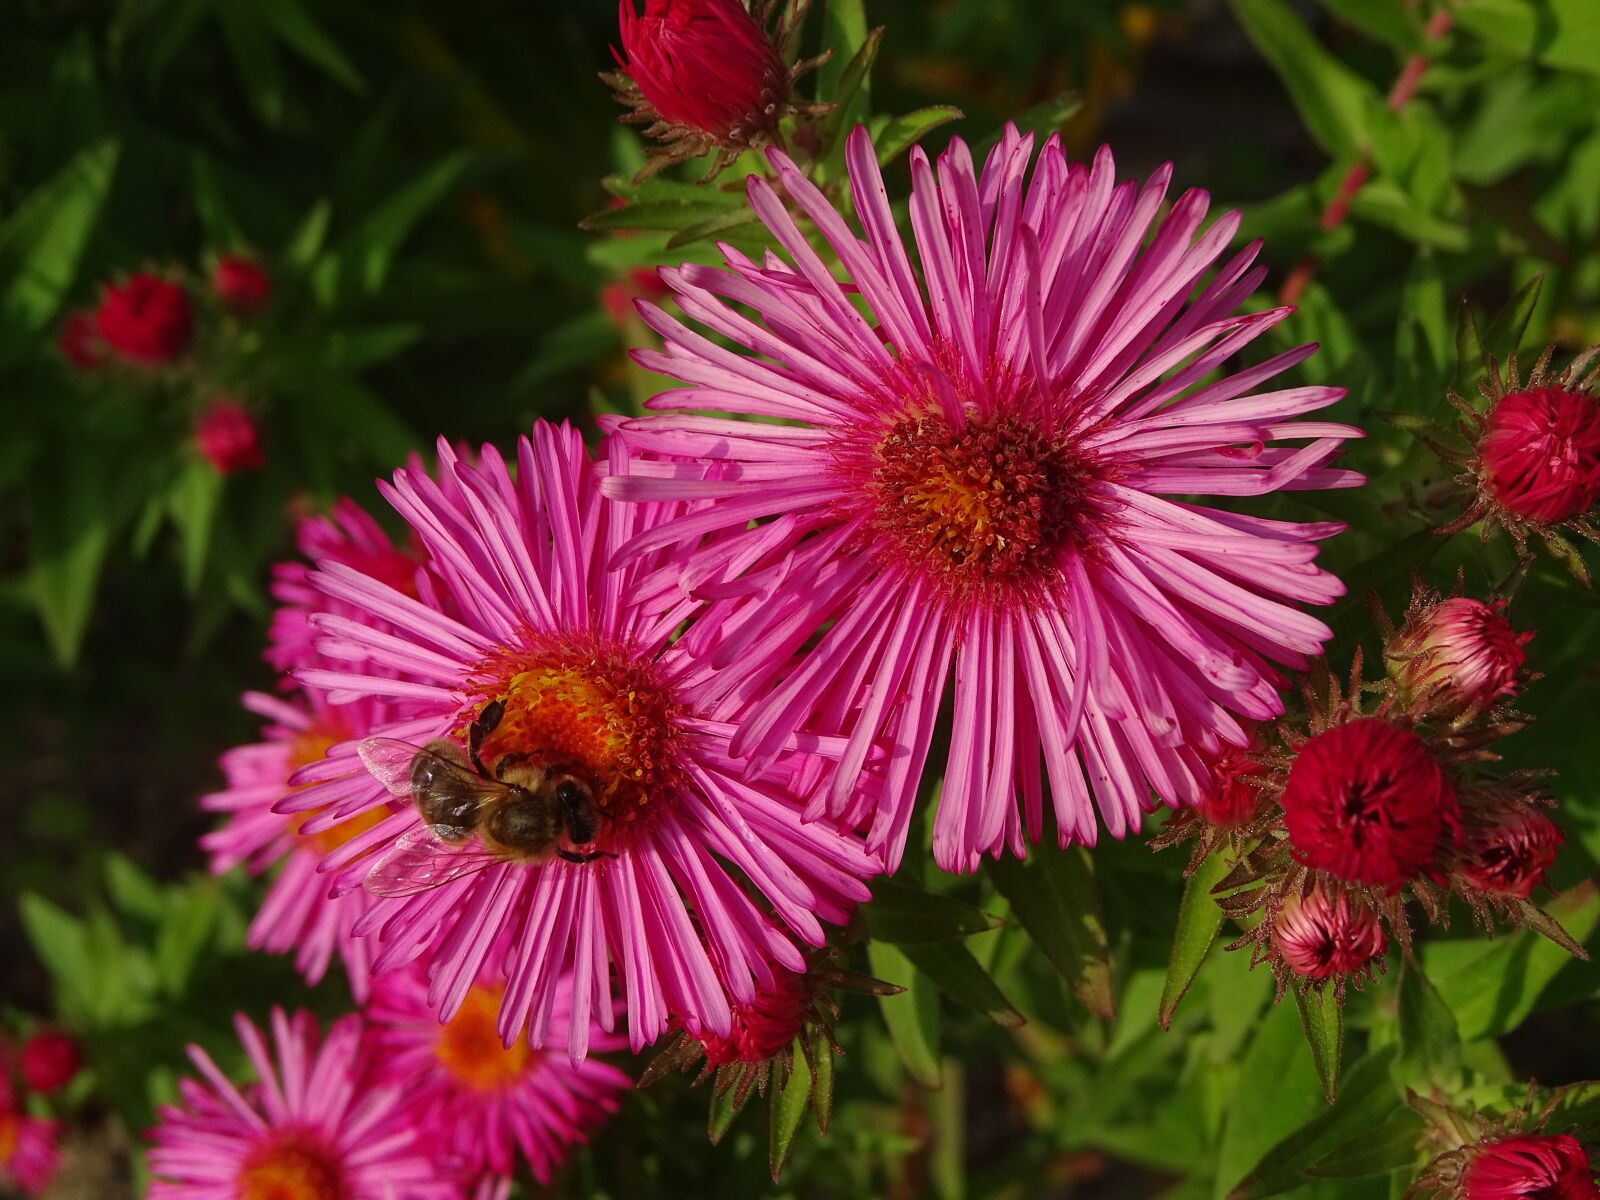 Sony Cyber-shot DSC-HX400V sample photo. Aster, aster amellus, bee photography